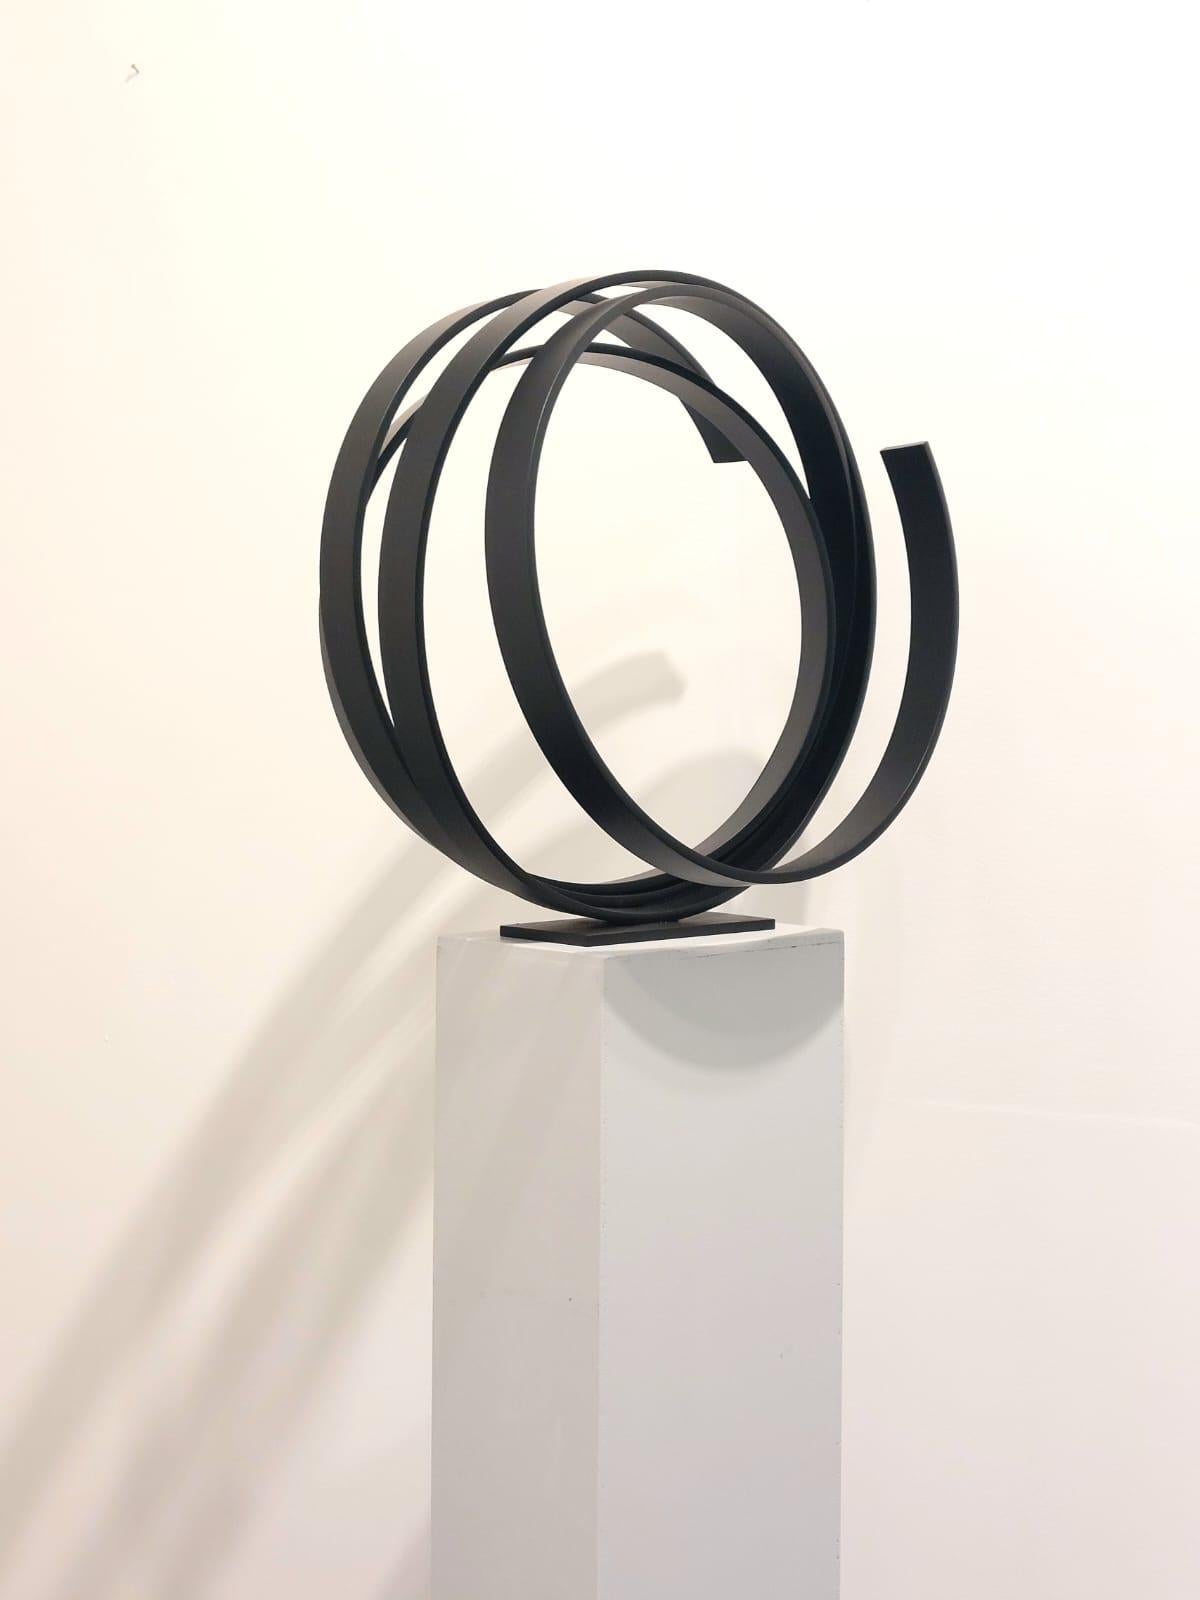 A large contemporary black powder coated steel sculpture. Beautiful on the floor or a pedestal. 
A contemporary statement piece full of elegance and movement.
_______________________________________________________________________

Born in 1951 in